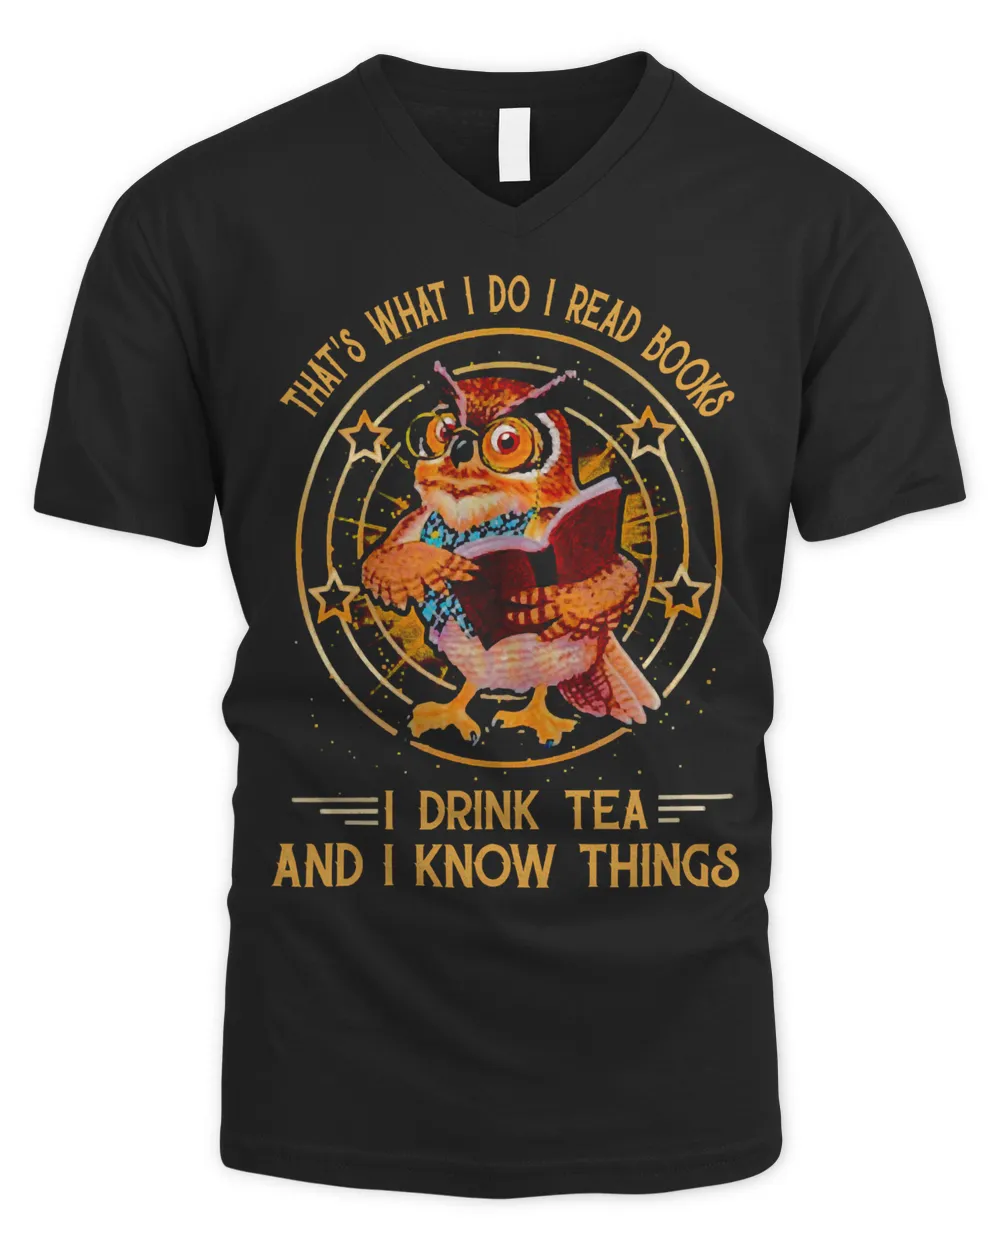 Thats what I do I read books I drink tea and I know things Book Reader